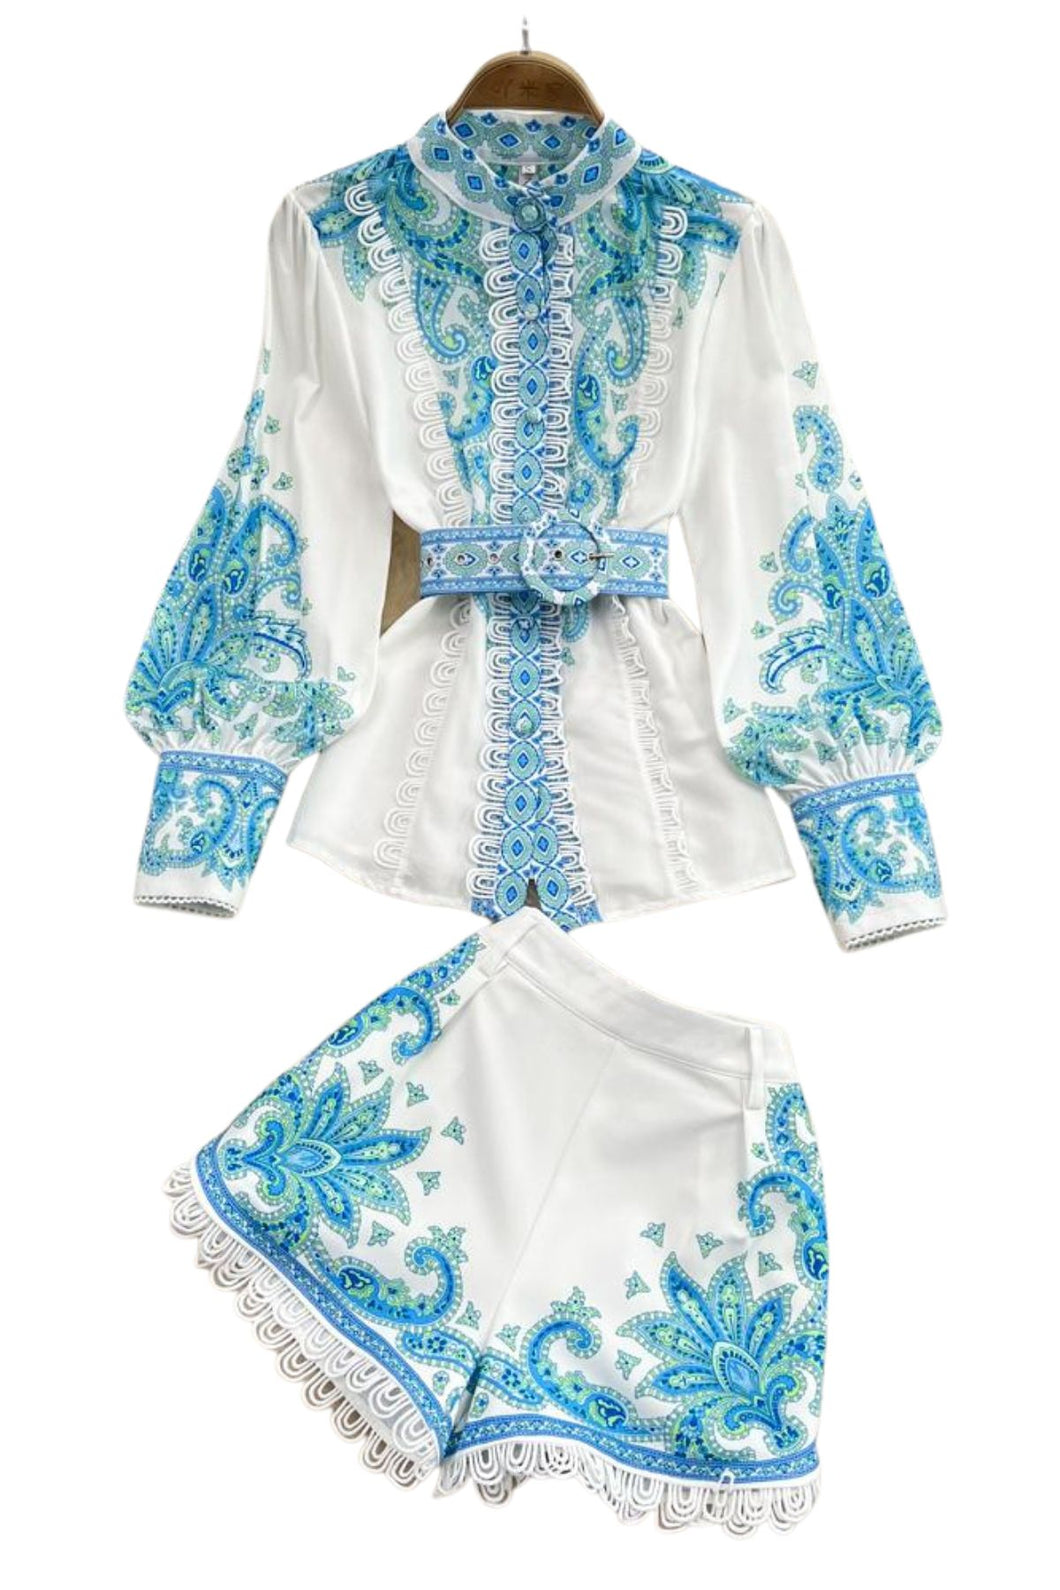 2 piece suit top with high neck, puff sleeve, vintage print blouse and shorts with belt pocket high quality